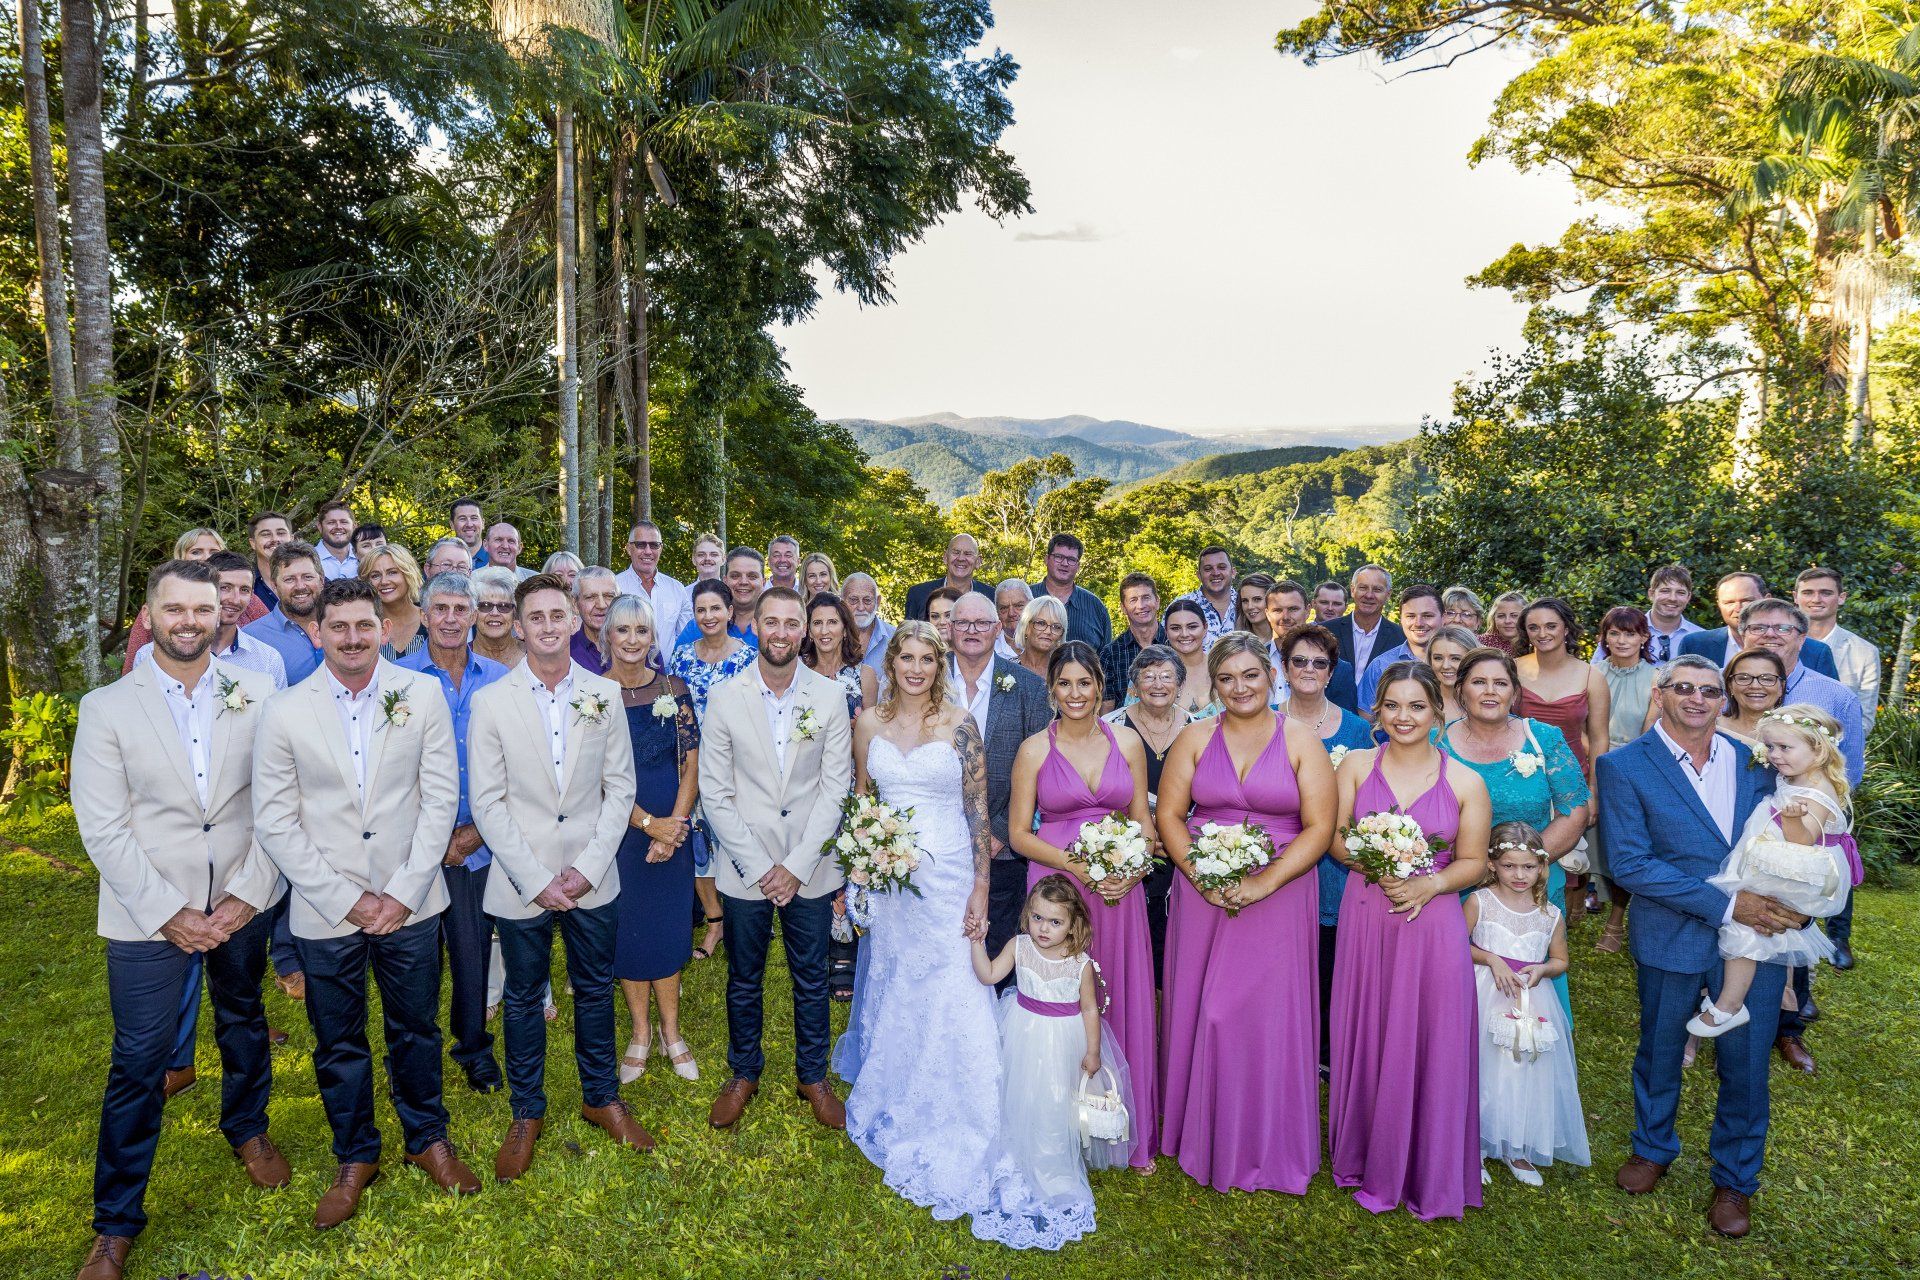 a large group of people are posing for a picture at a wedding .